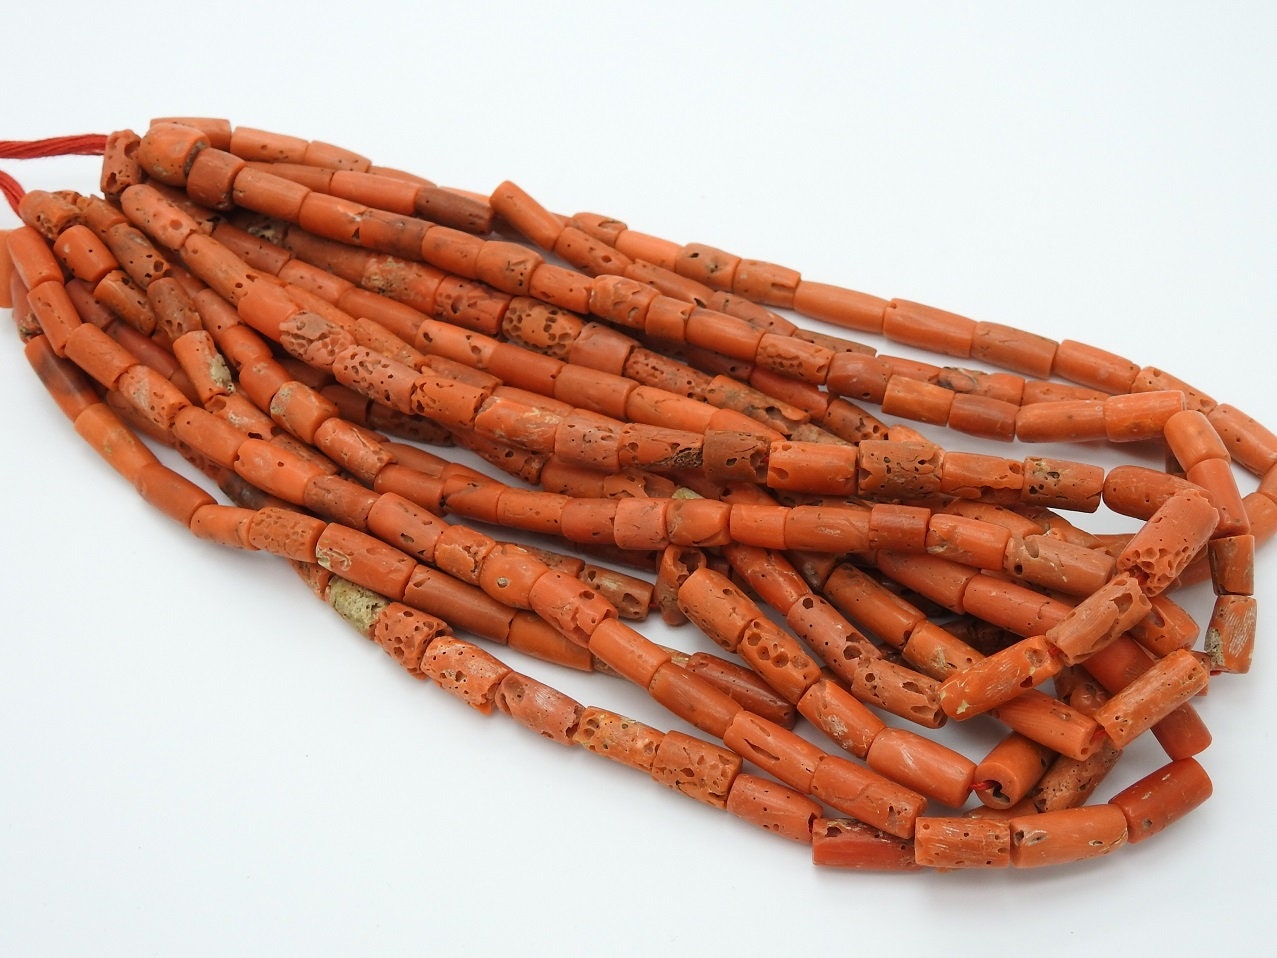 100%Natural,Red Coral Smooth Tubes,Cylinder,Drum,Handmade,For Making Jewelry,Necklace,16 Inch 15X7To9X7 MM Approx,Wholesaler,Supplies BK-CR2 | Save 33% - Rajasthan Living 16